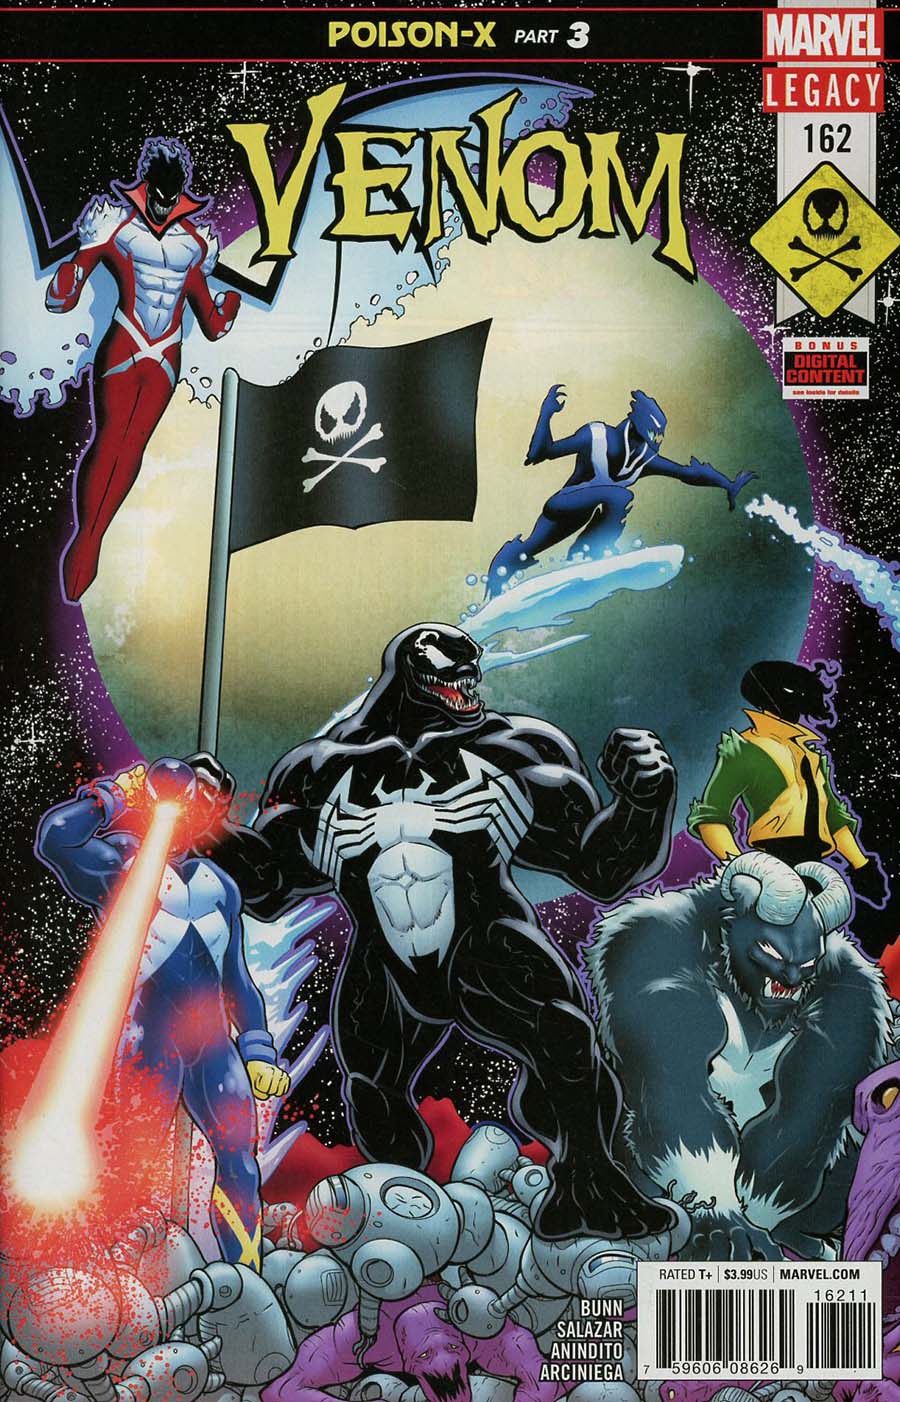 Venom Vol 3 #162 Cover A Regular Will Robson Cover (Poison X Part 3)(Marvel Legacy Tie-In)